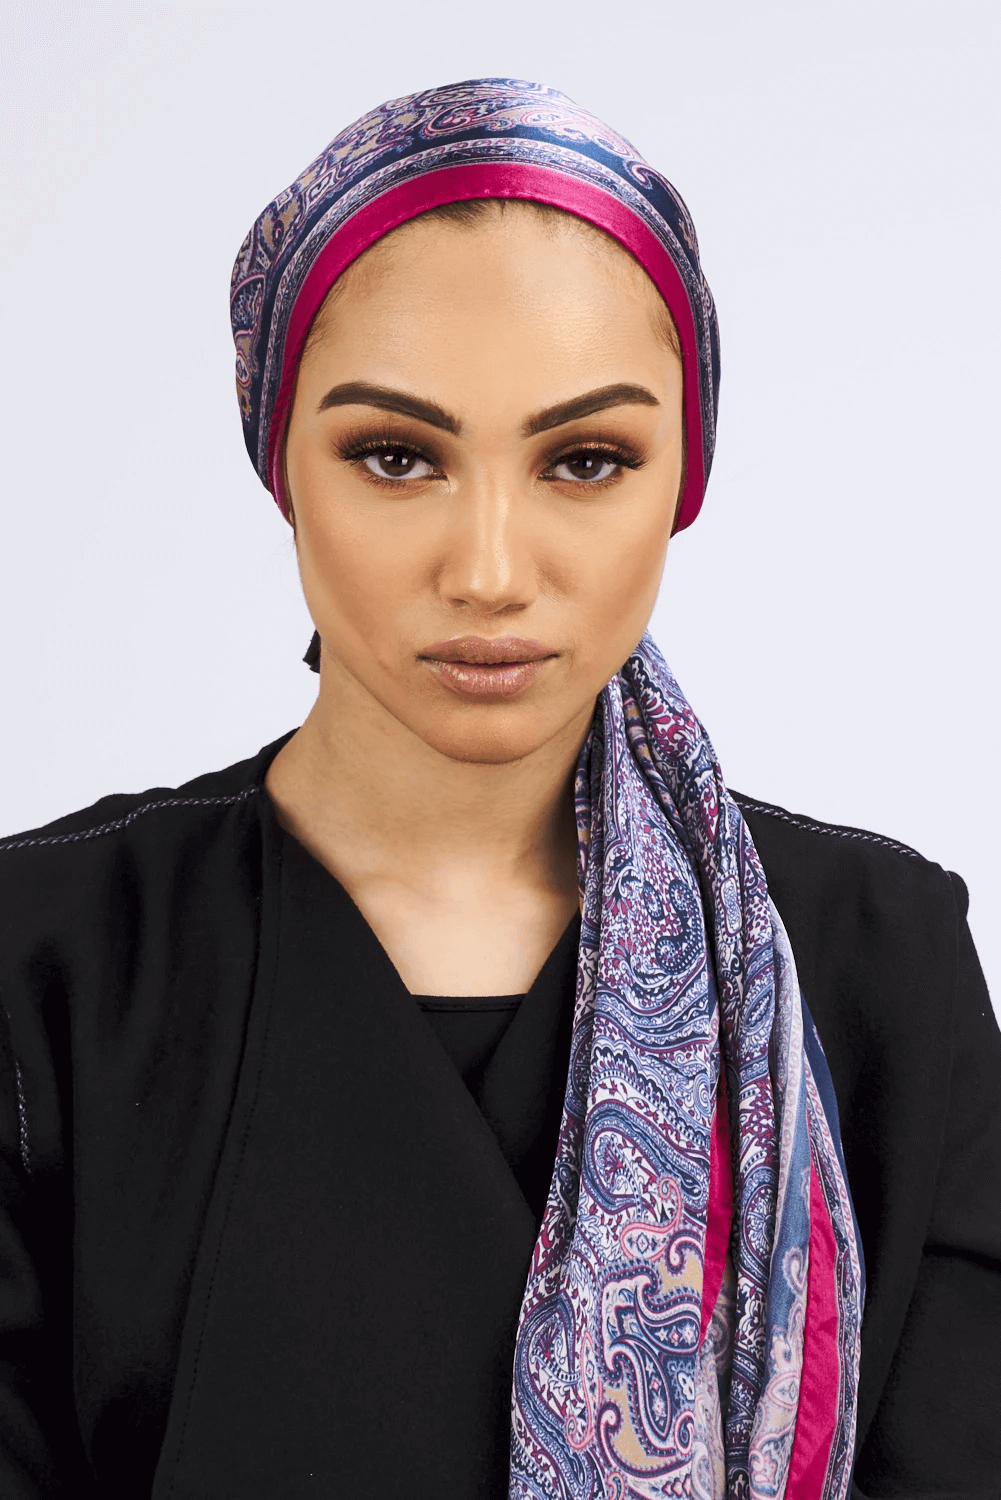 Silk Satin Scarf in Pink & Blue Paisley Print